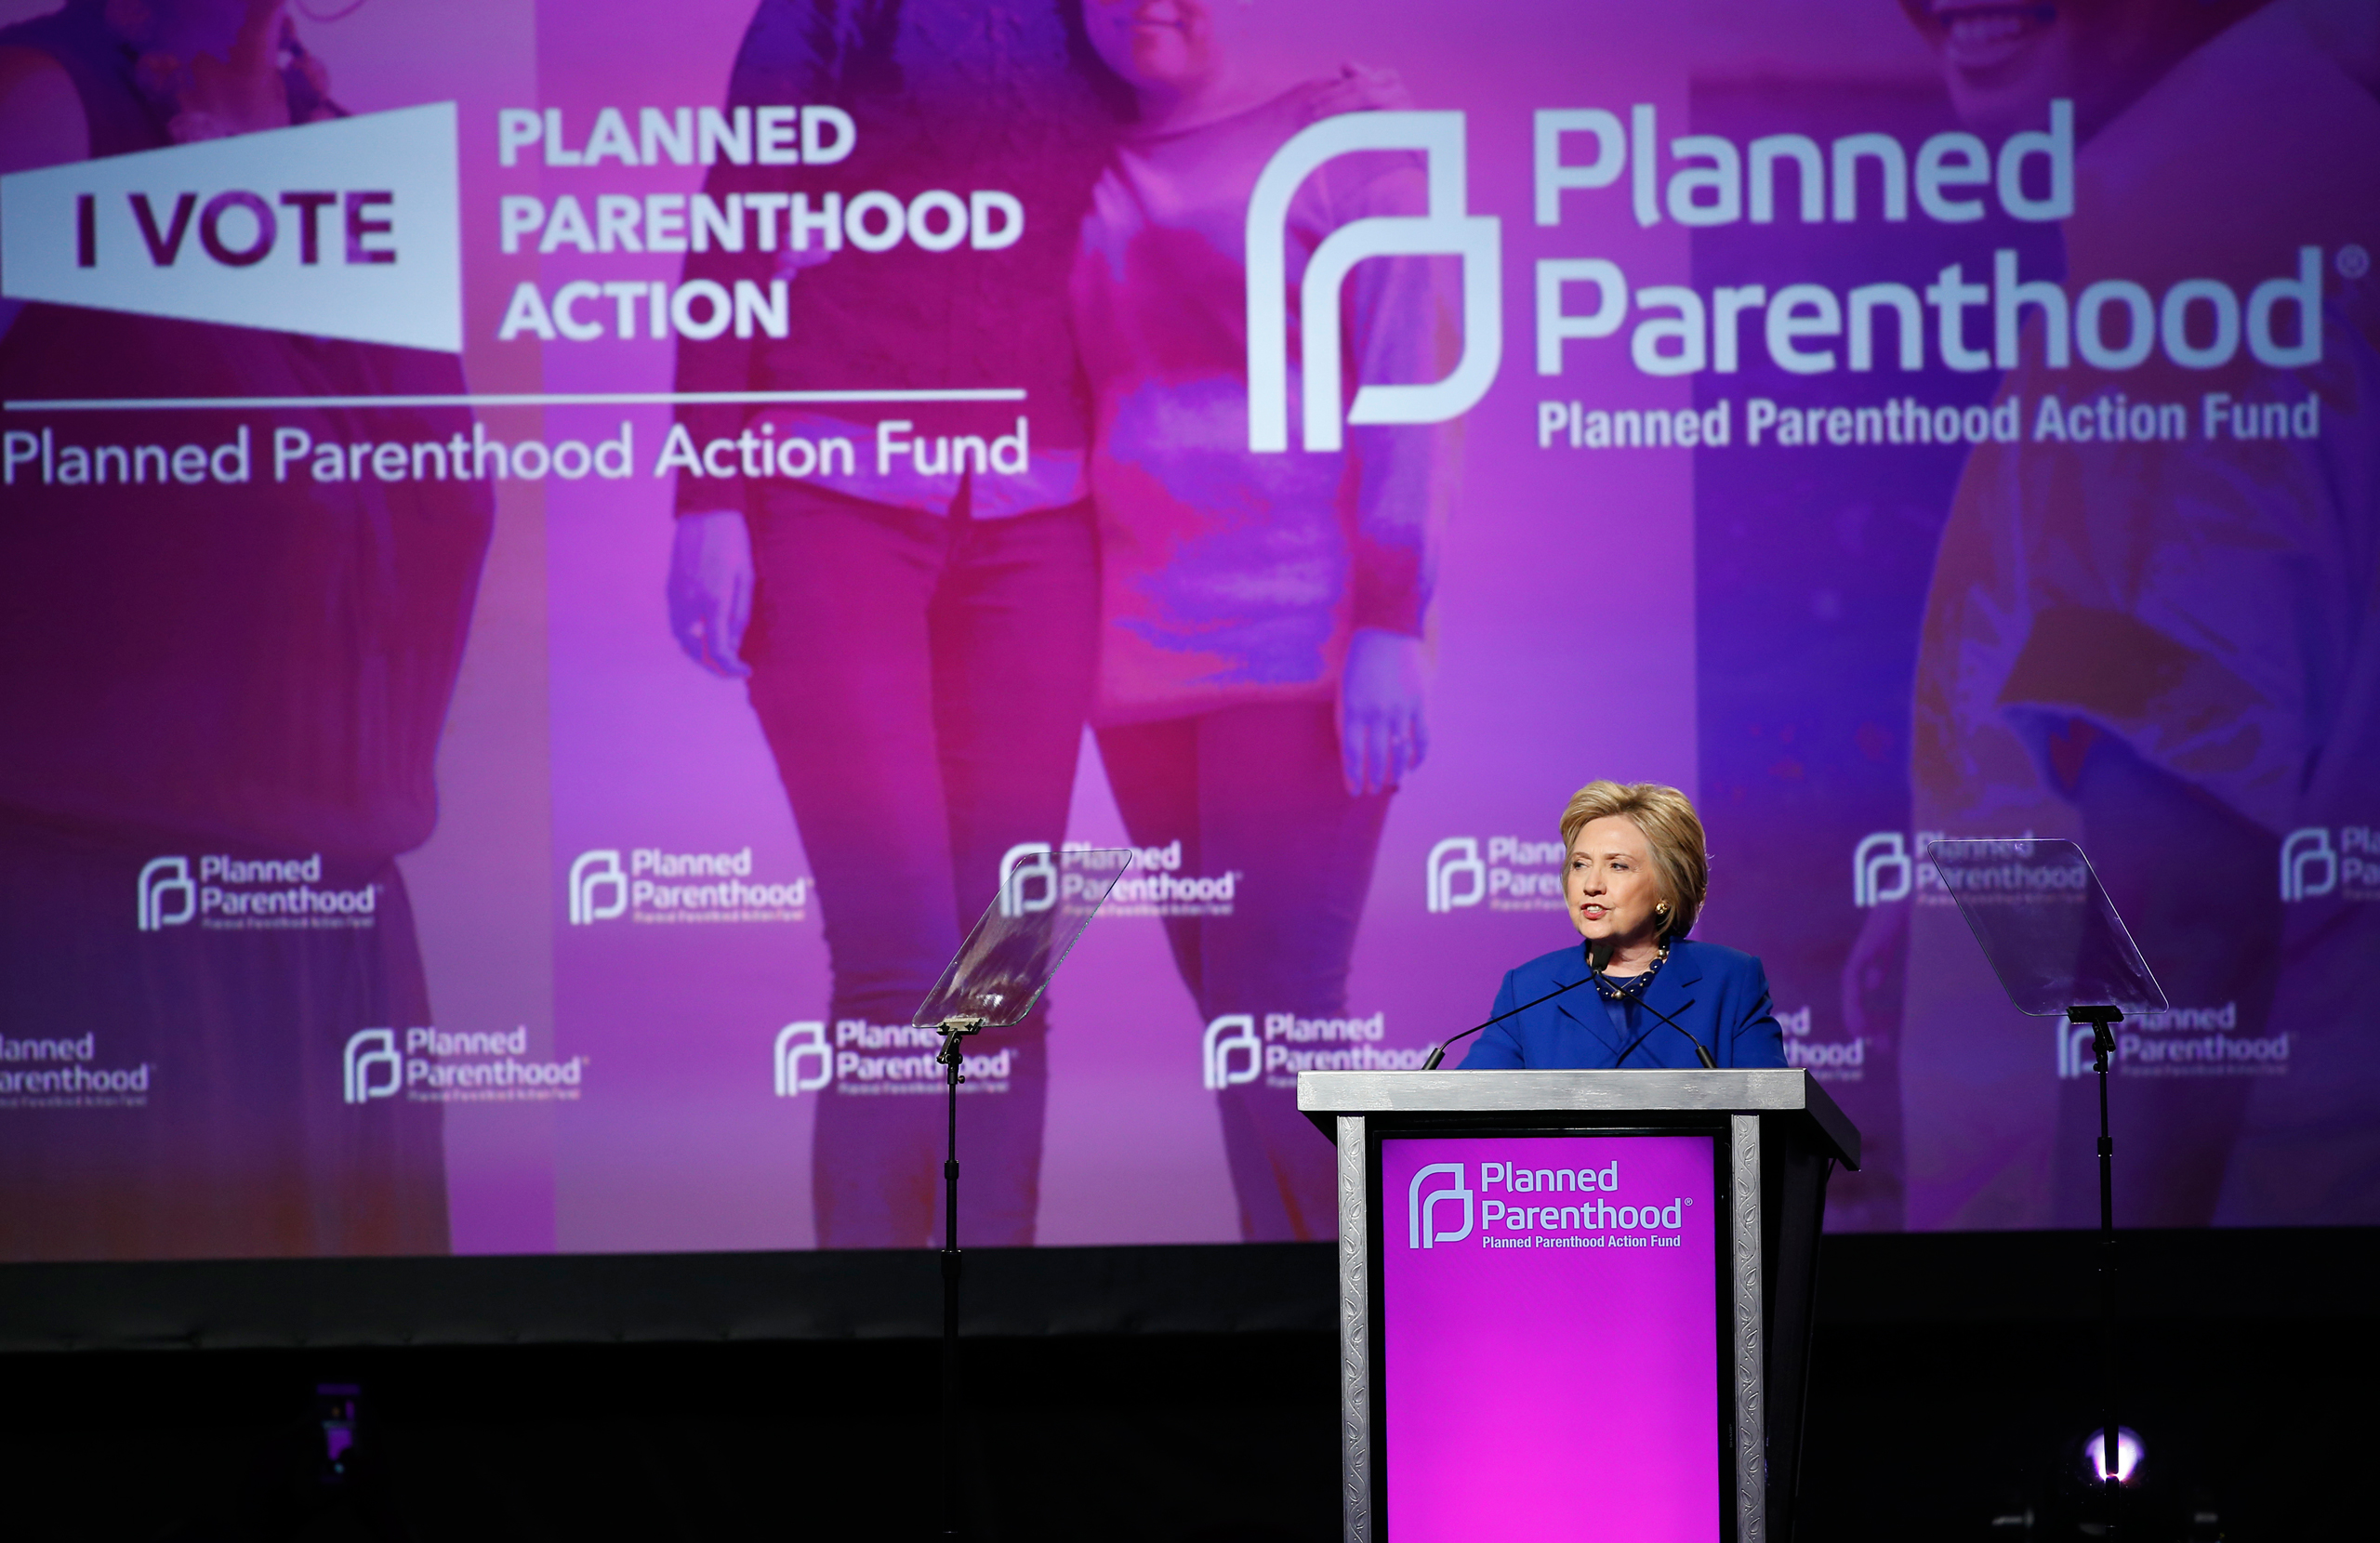 Democratic presidential candidate Hillary Clinton speaks during a Planned Parenthood Action Fund membership event in Washington on June 10, 2016. (Alex Brandon—AP)